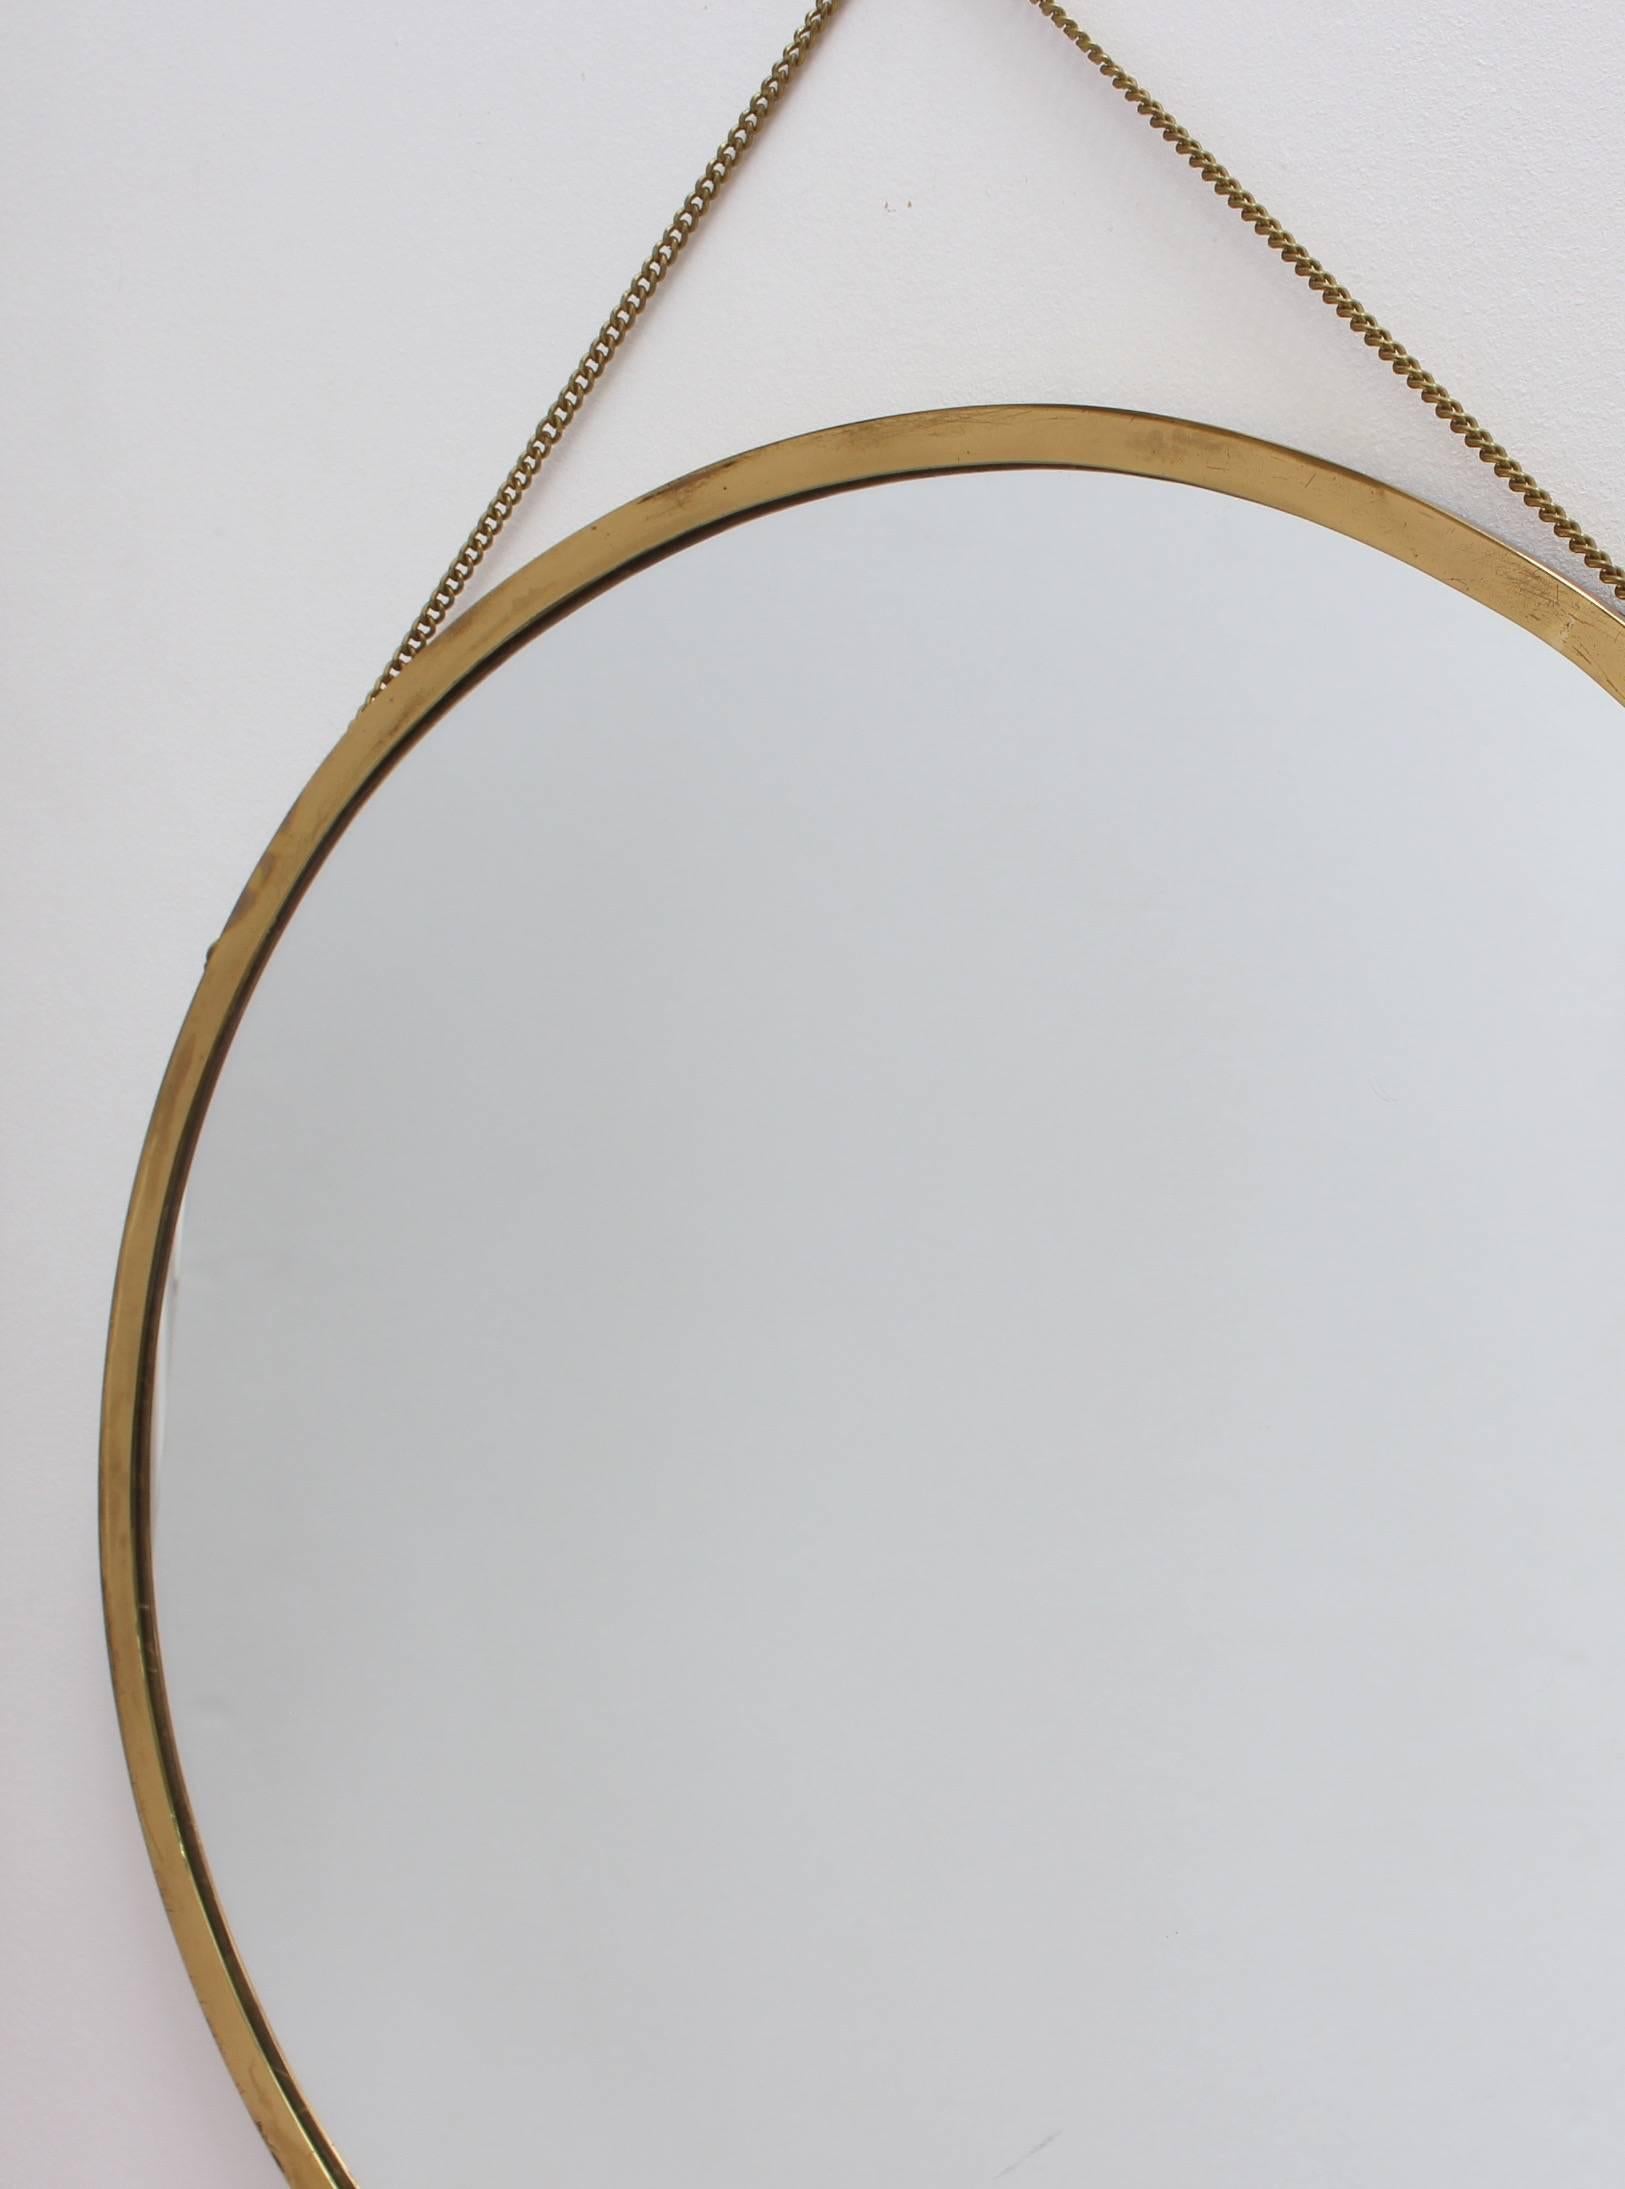 Midcentury Italian wall mirror with brass frame, circa 1950s. The mirror is perfectly circular with an attached brass hanging chain. The effect is so elegant and very distinctive in a modern Gio Ponti style. This mirror is in good vintage condition.